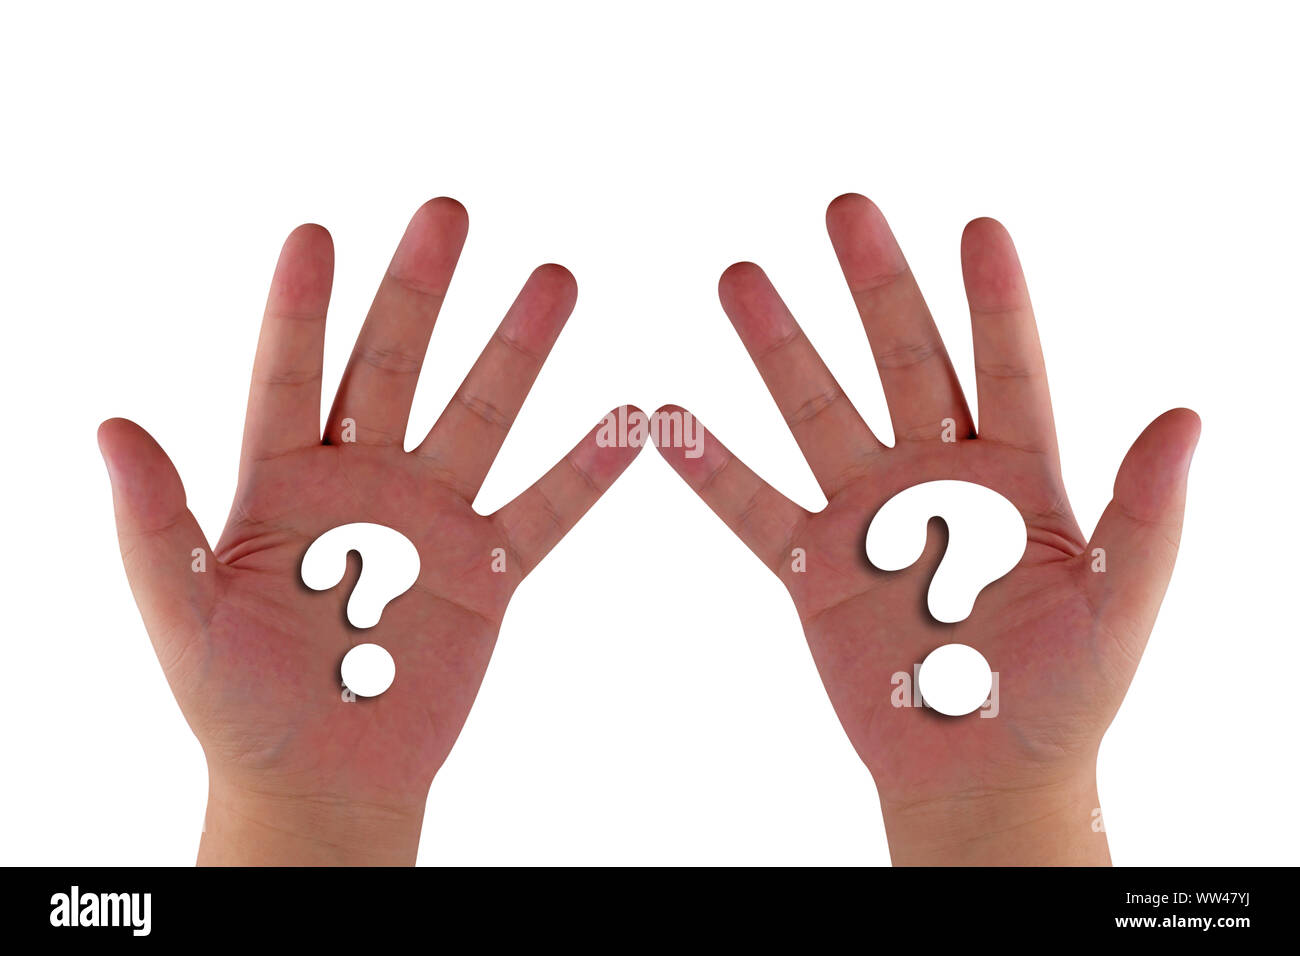 Business solution, problem concept, hand holding question symbol, making decision Stock Photo